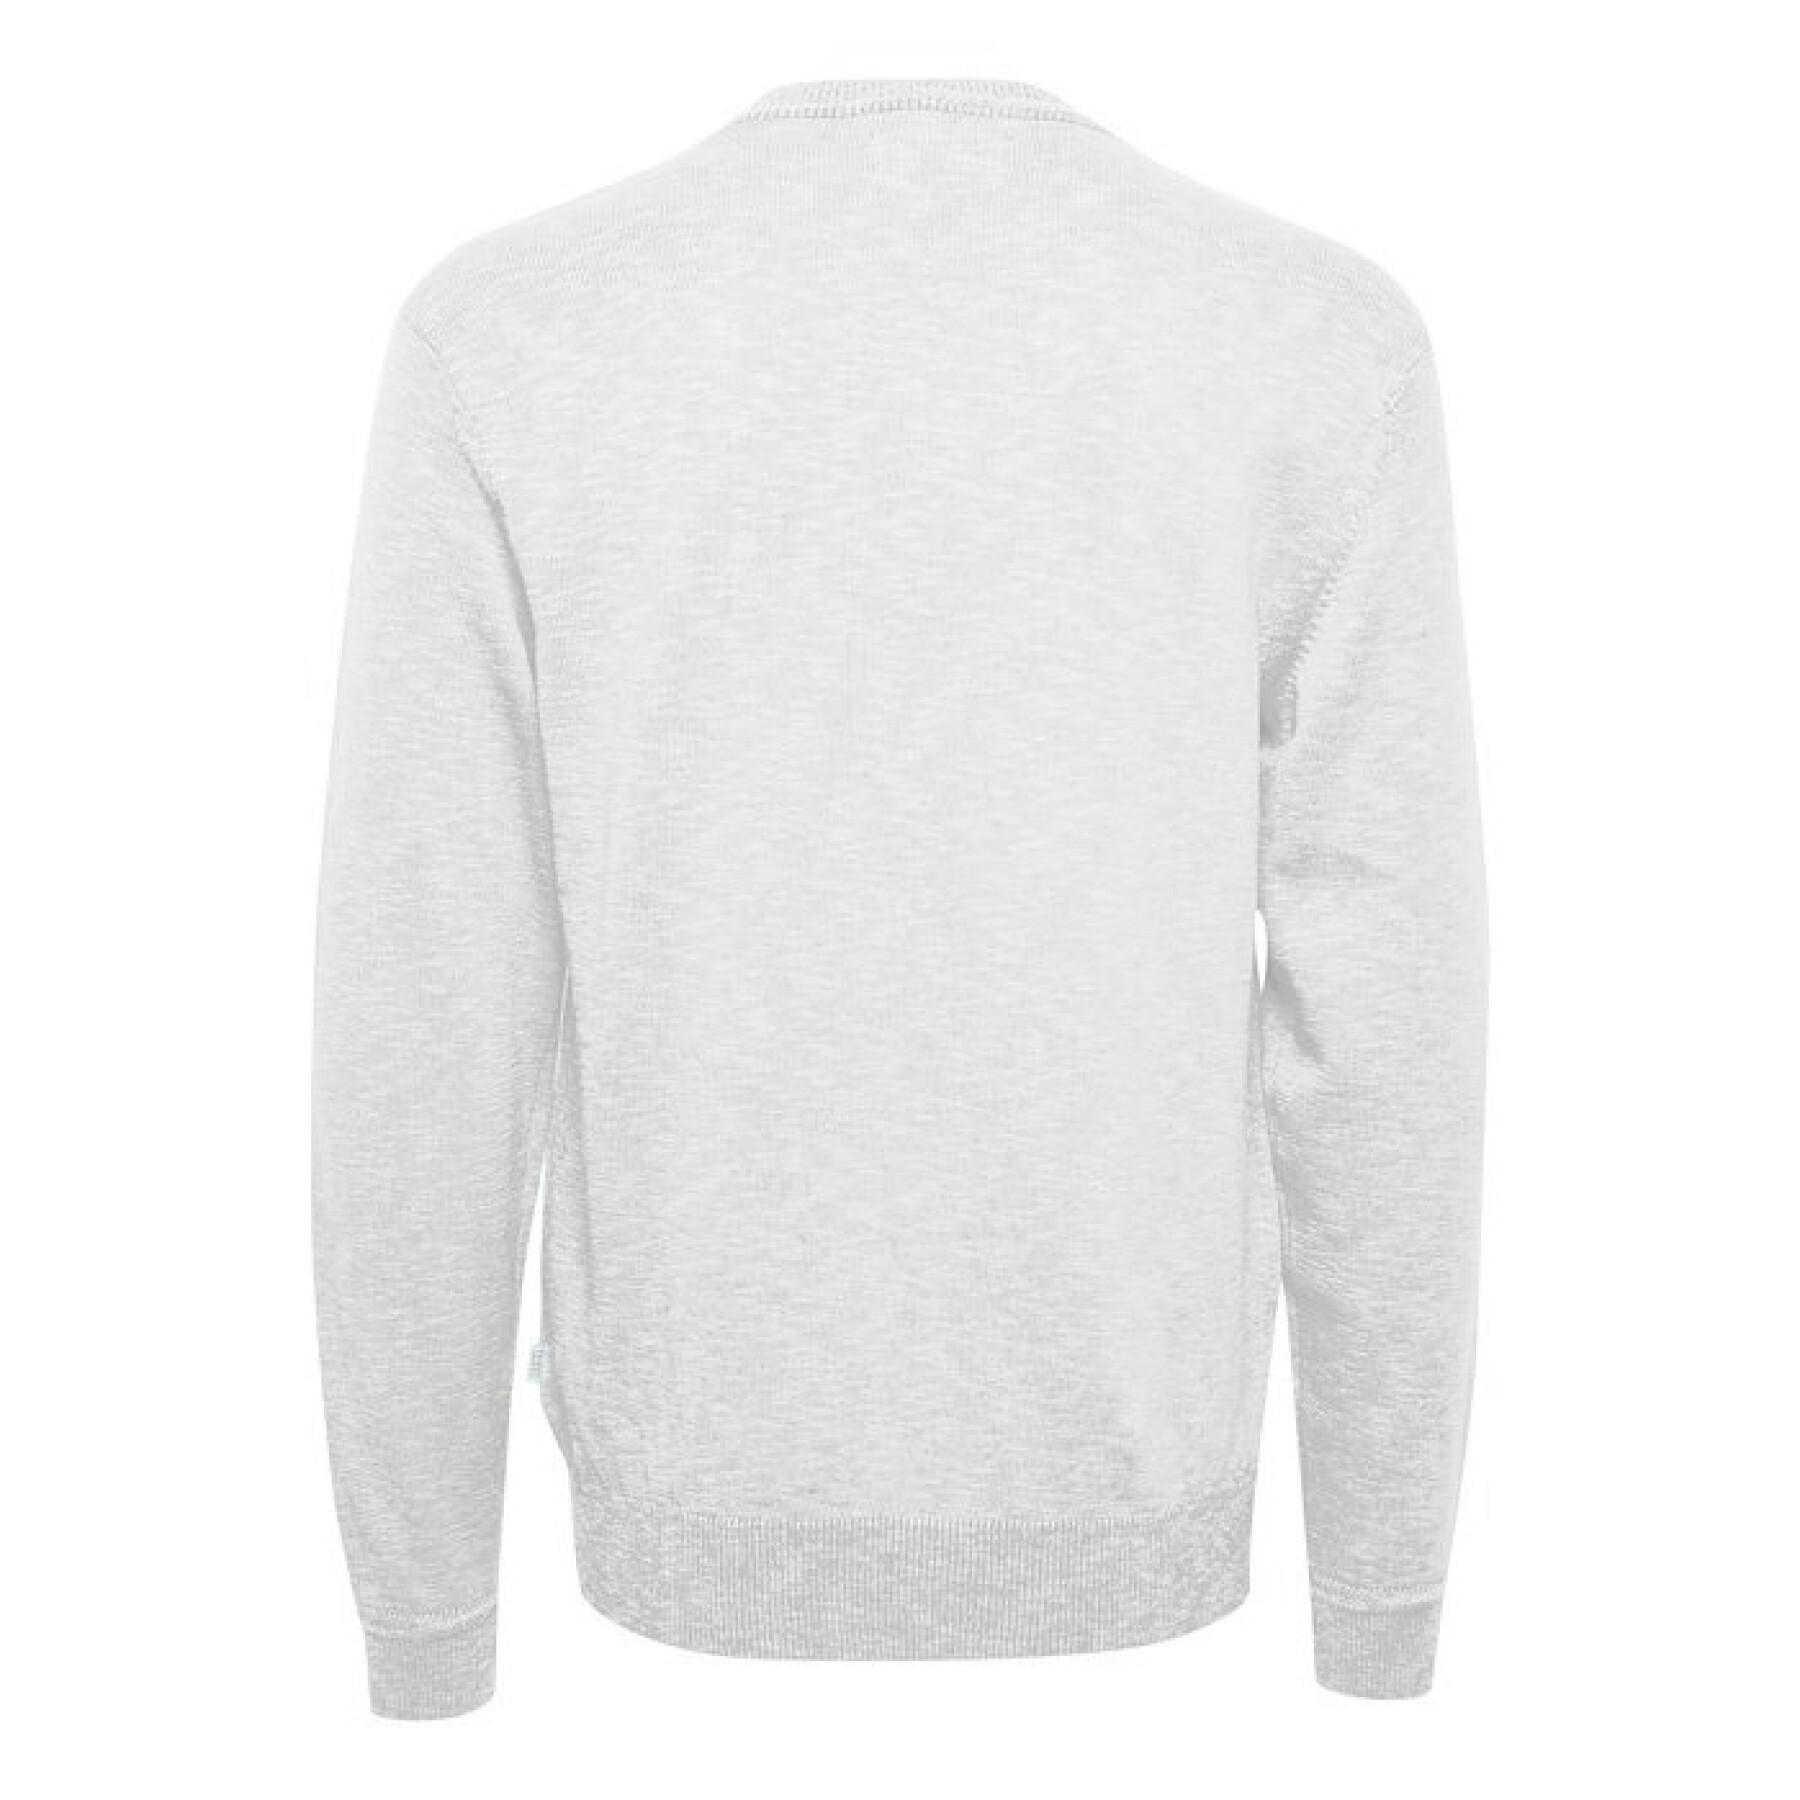 Two-tone knit sweater Casual Friday Karl